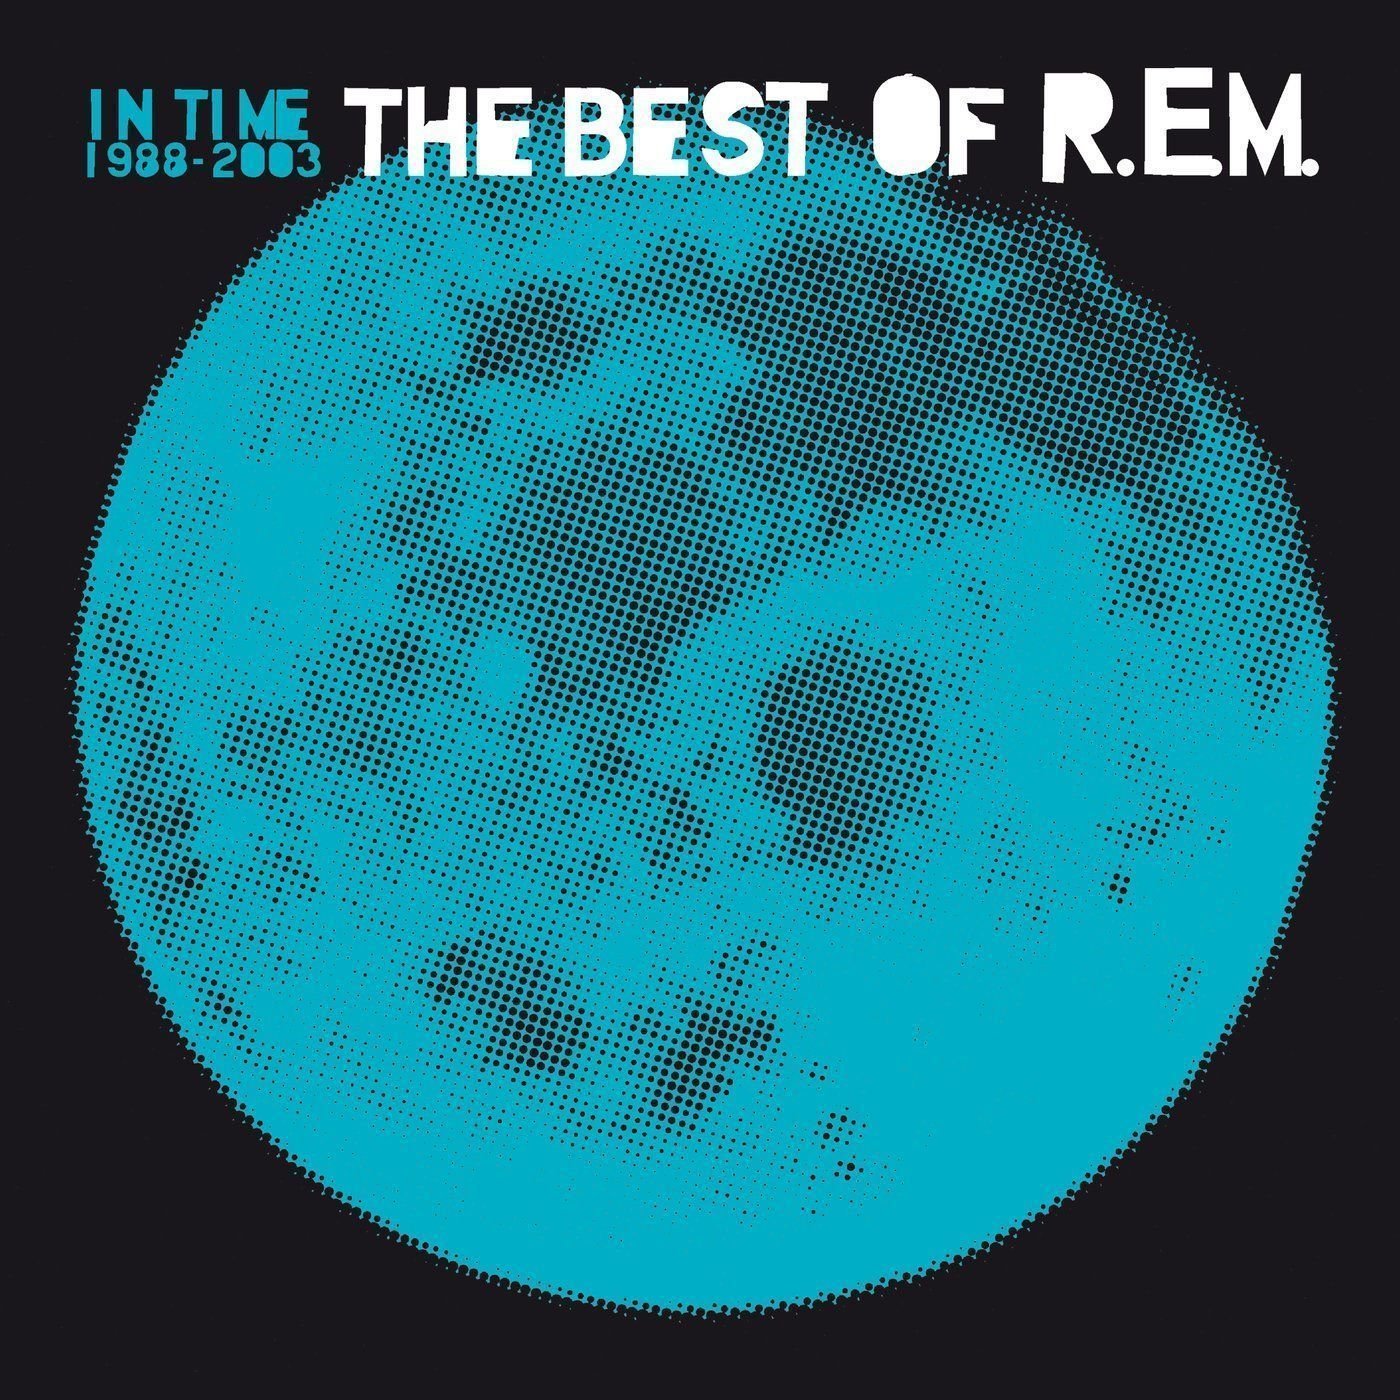 LP R.E.M. - In Time: The Best Of R.E.M. 1988-2003 (2 LP)